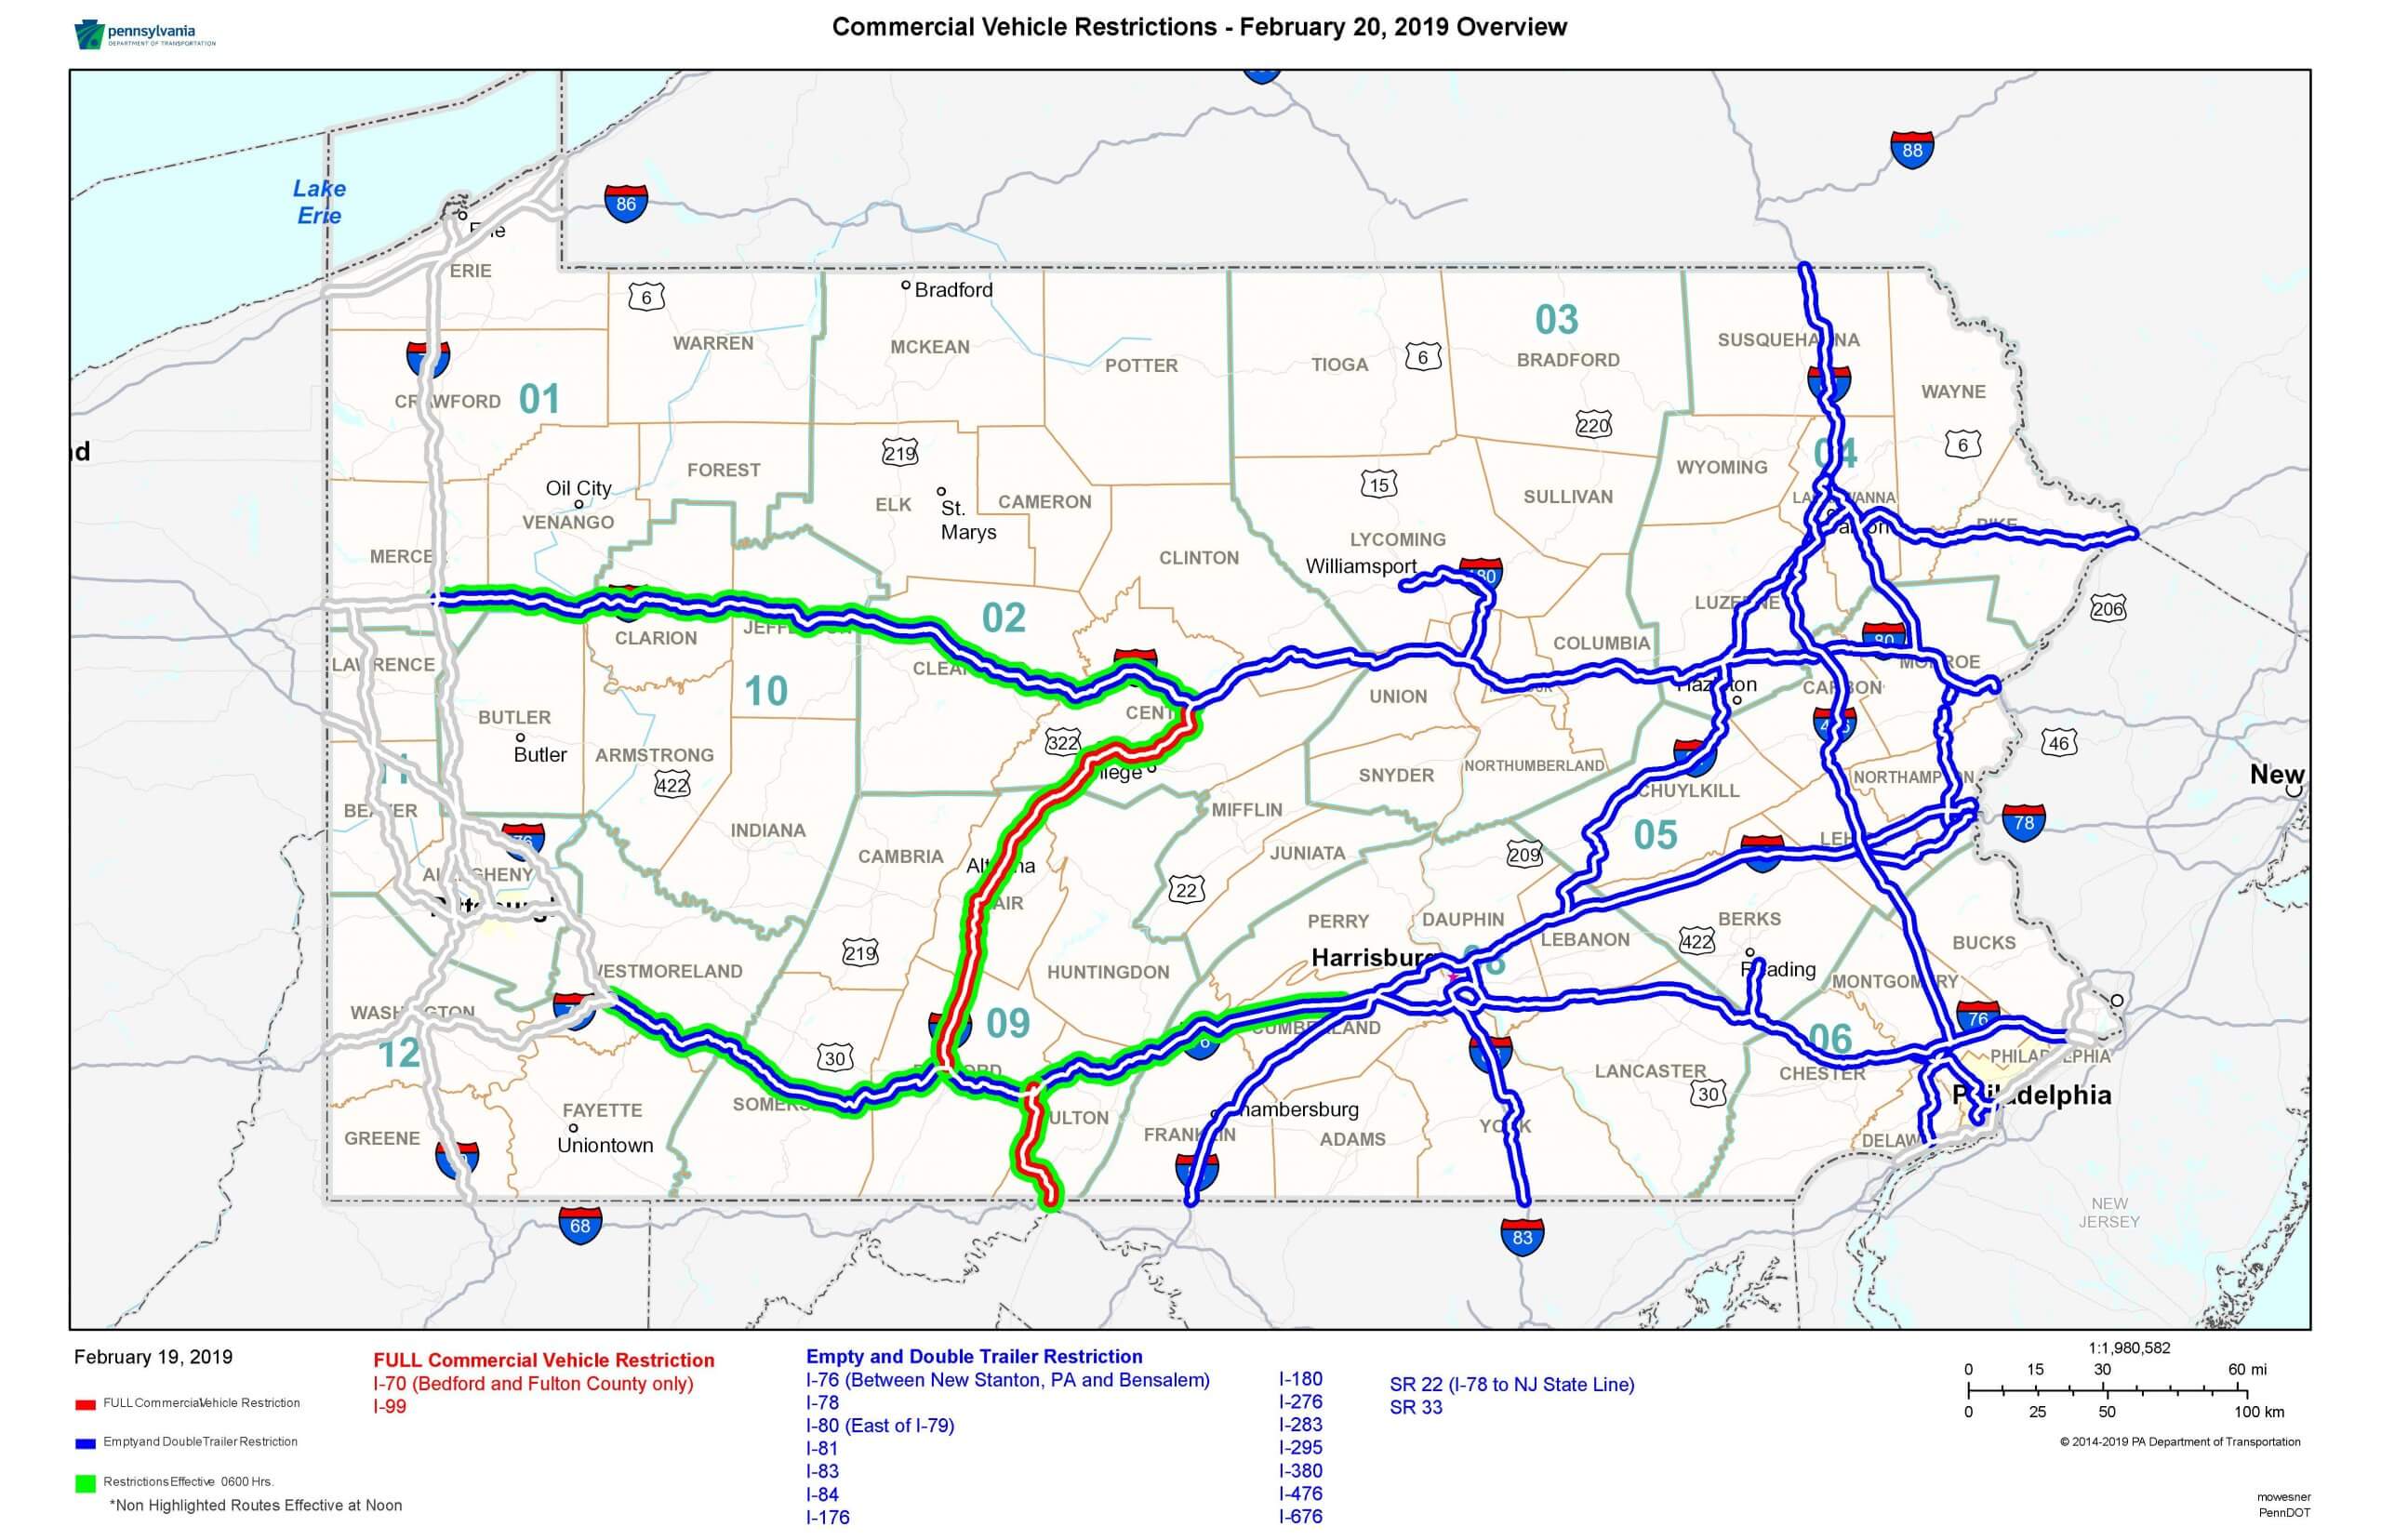 PennDOT Announces Vehicle Restrictions Due to Storm, Ice